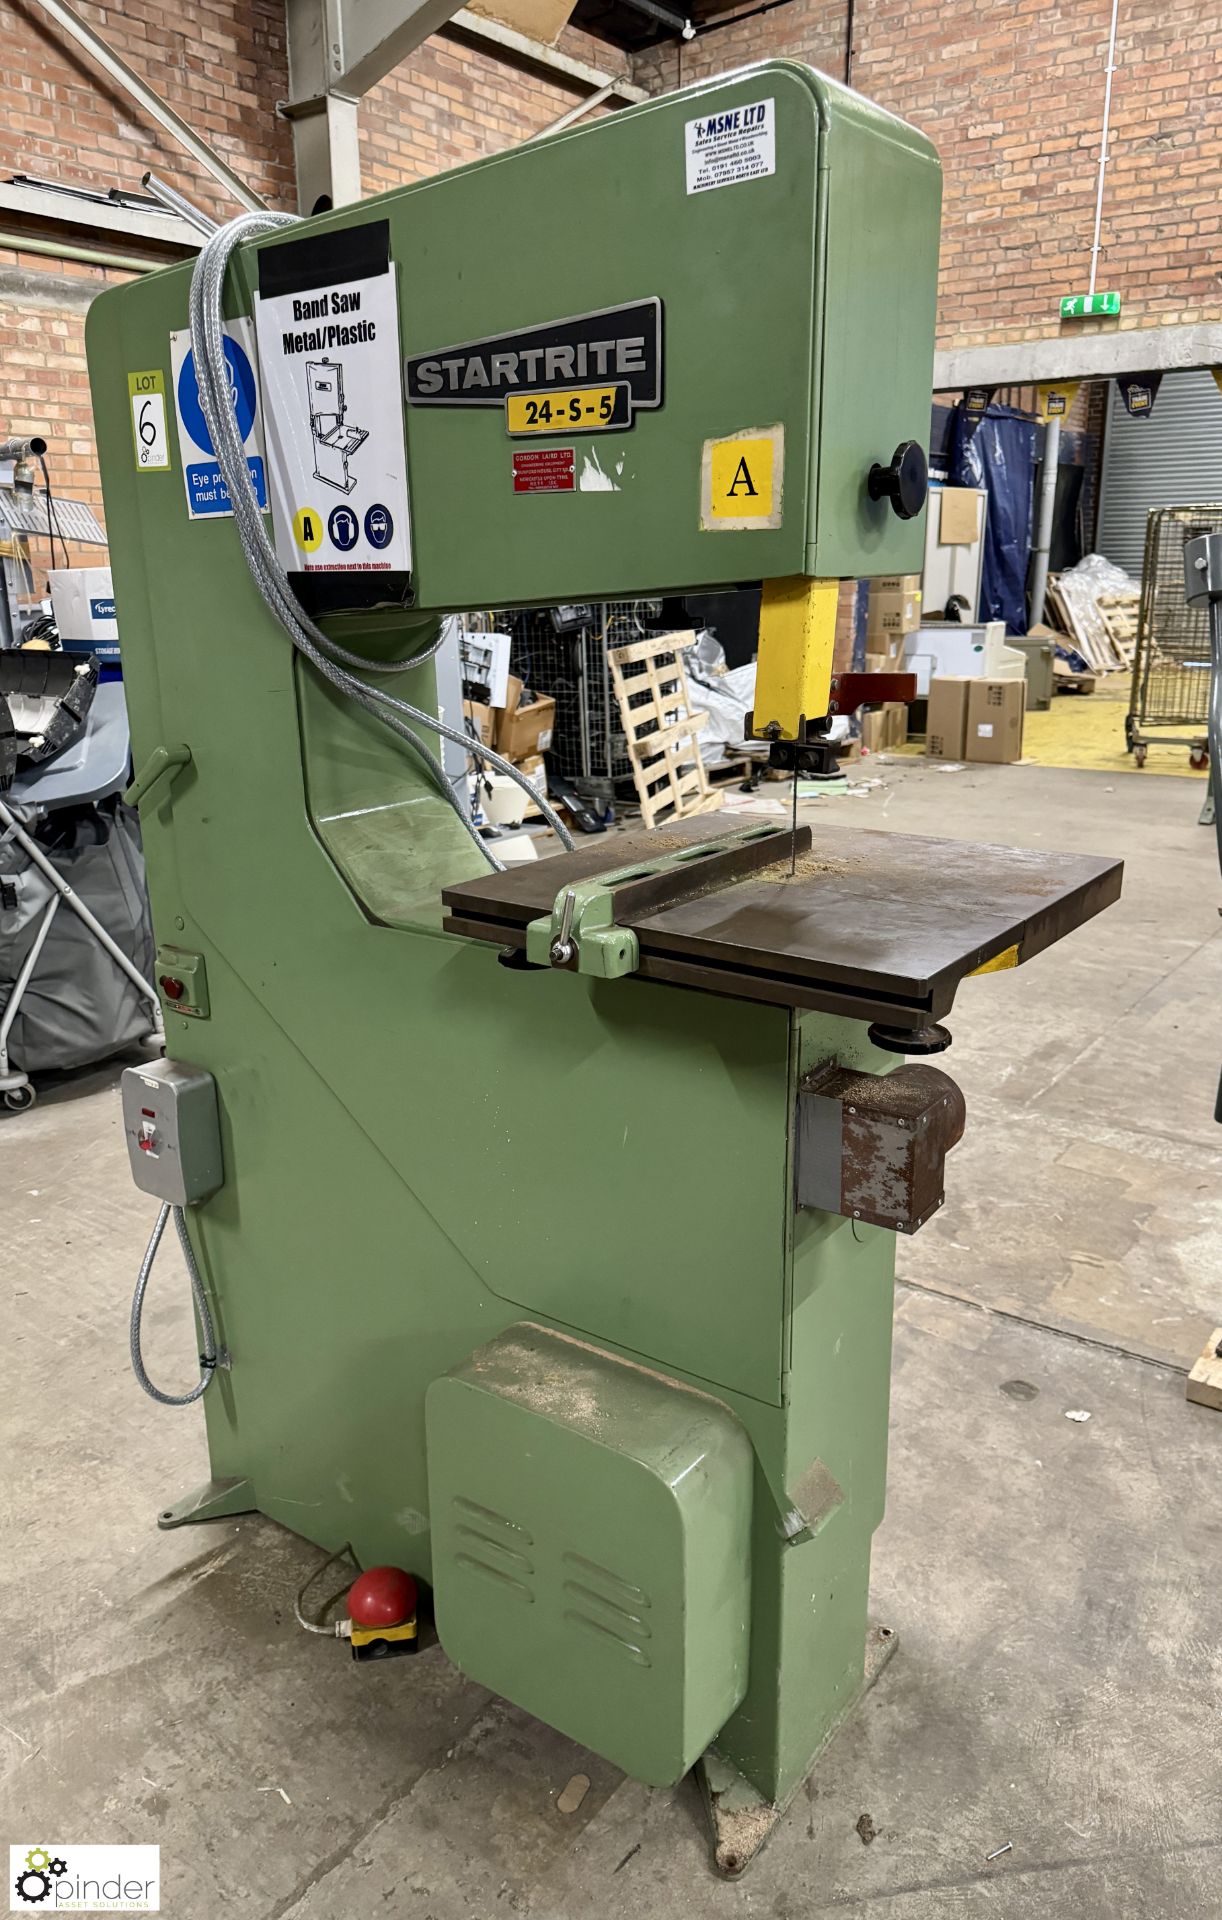 Startrite 24-S-5 vertical Bandsaw, 415volts, 600mm throat, serial number 27011, with MTE power